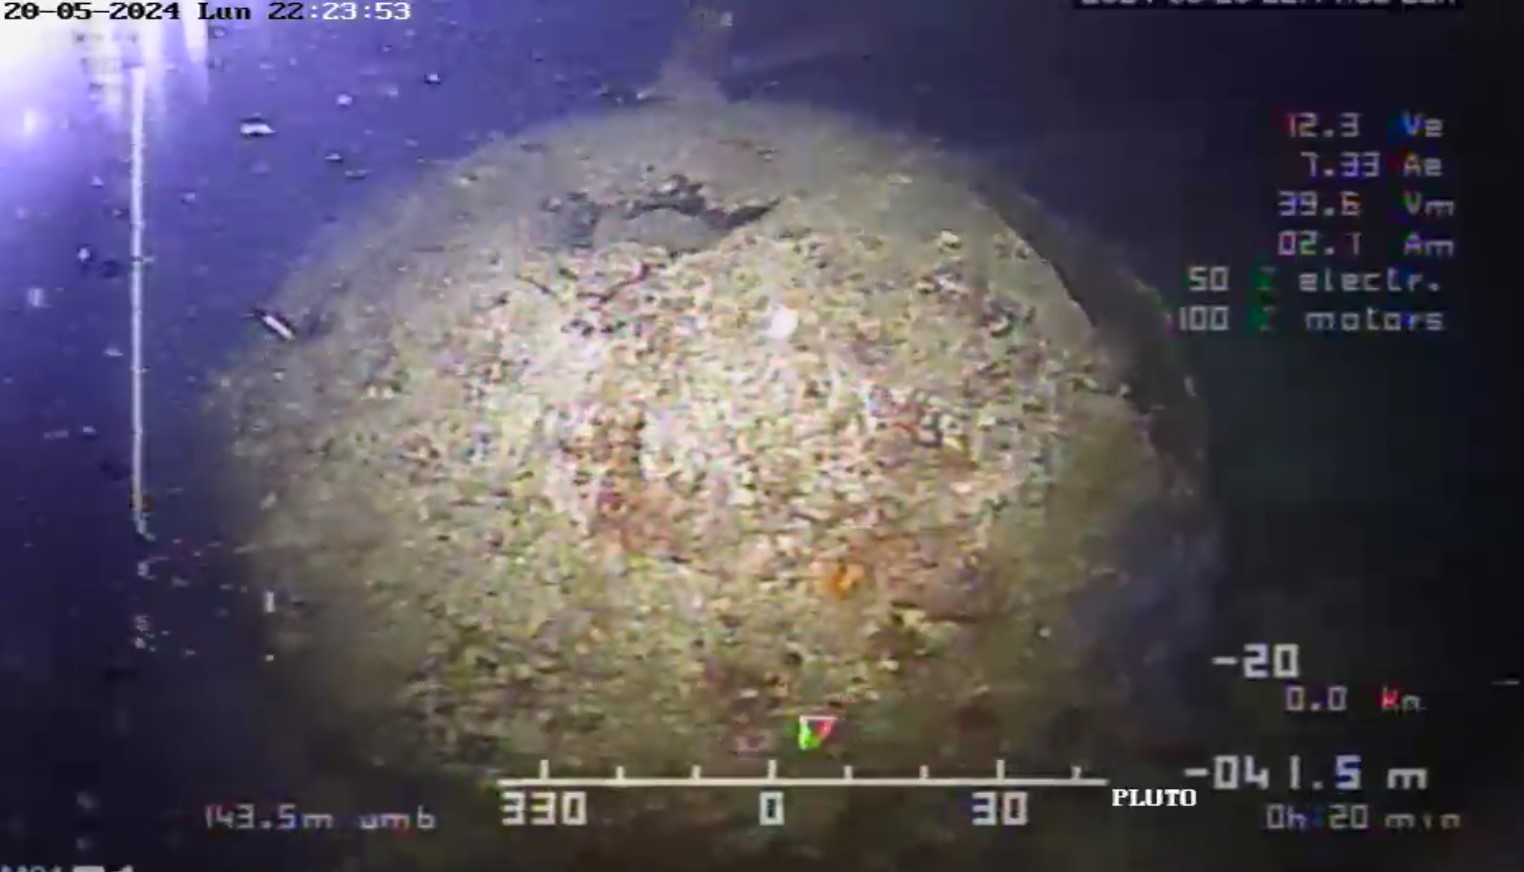 One of the WWII mines detected in the bay of Cagliari